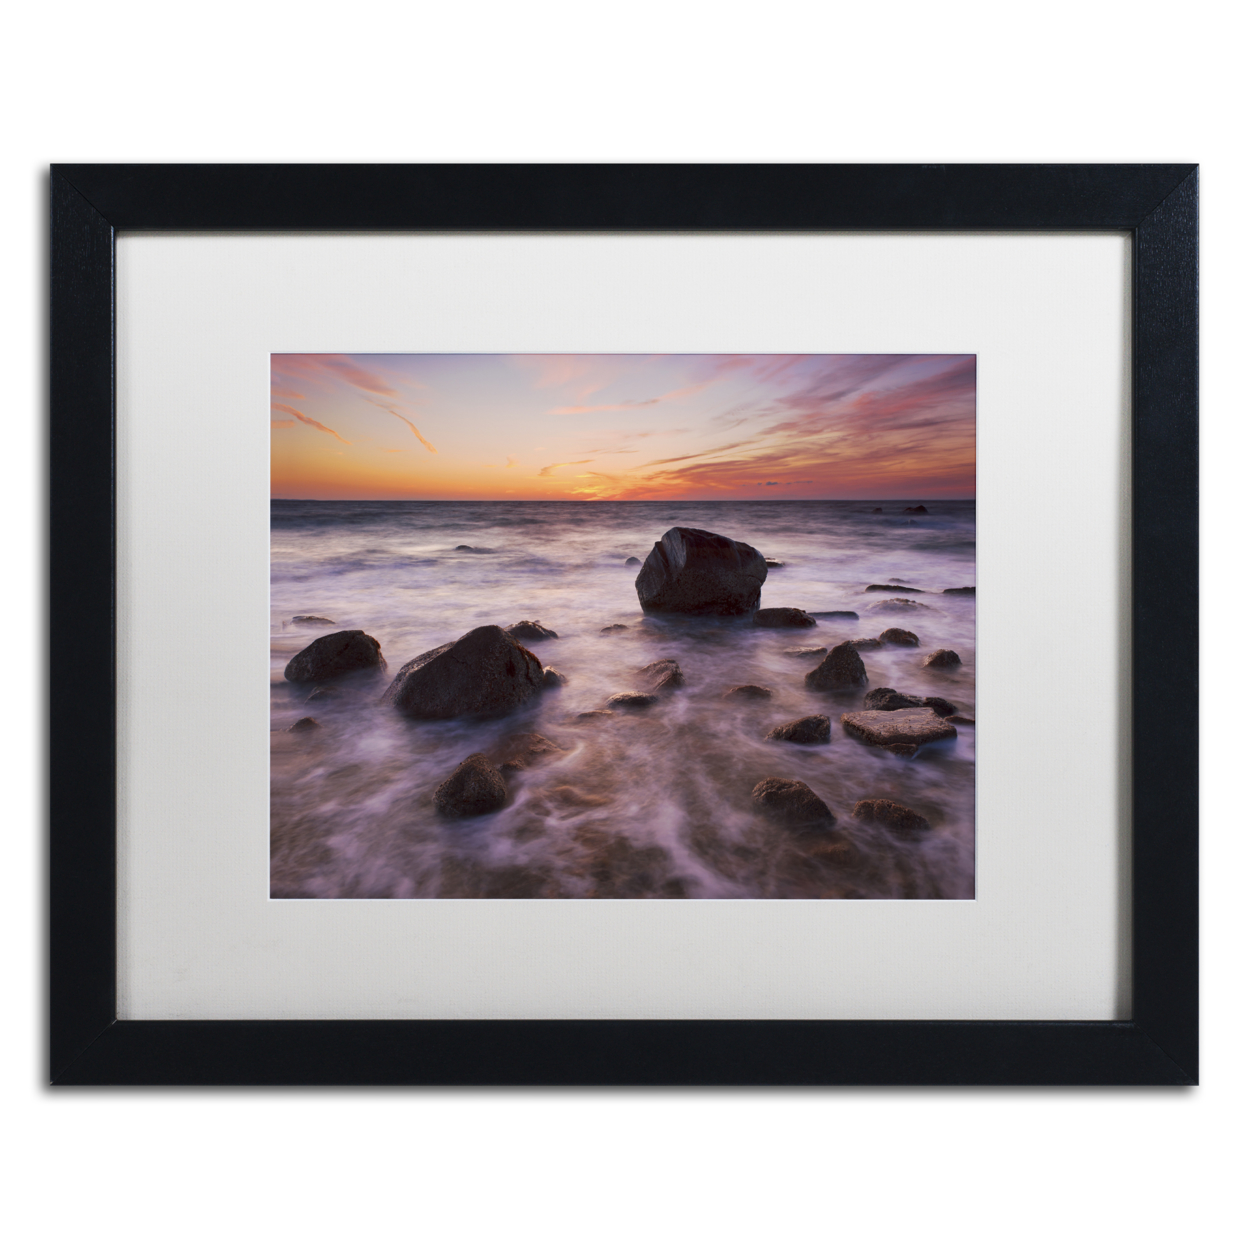 Michael Blanchette Photography 'Silky Water Rocks' Black Wooden Framed Art 18 X 22 Inches